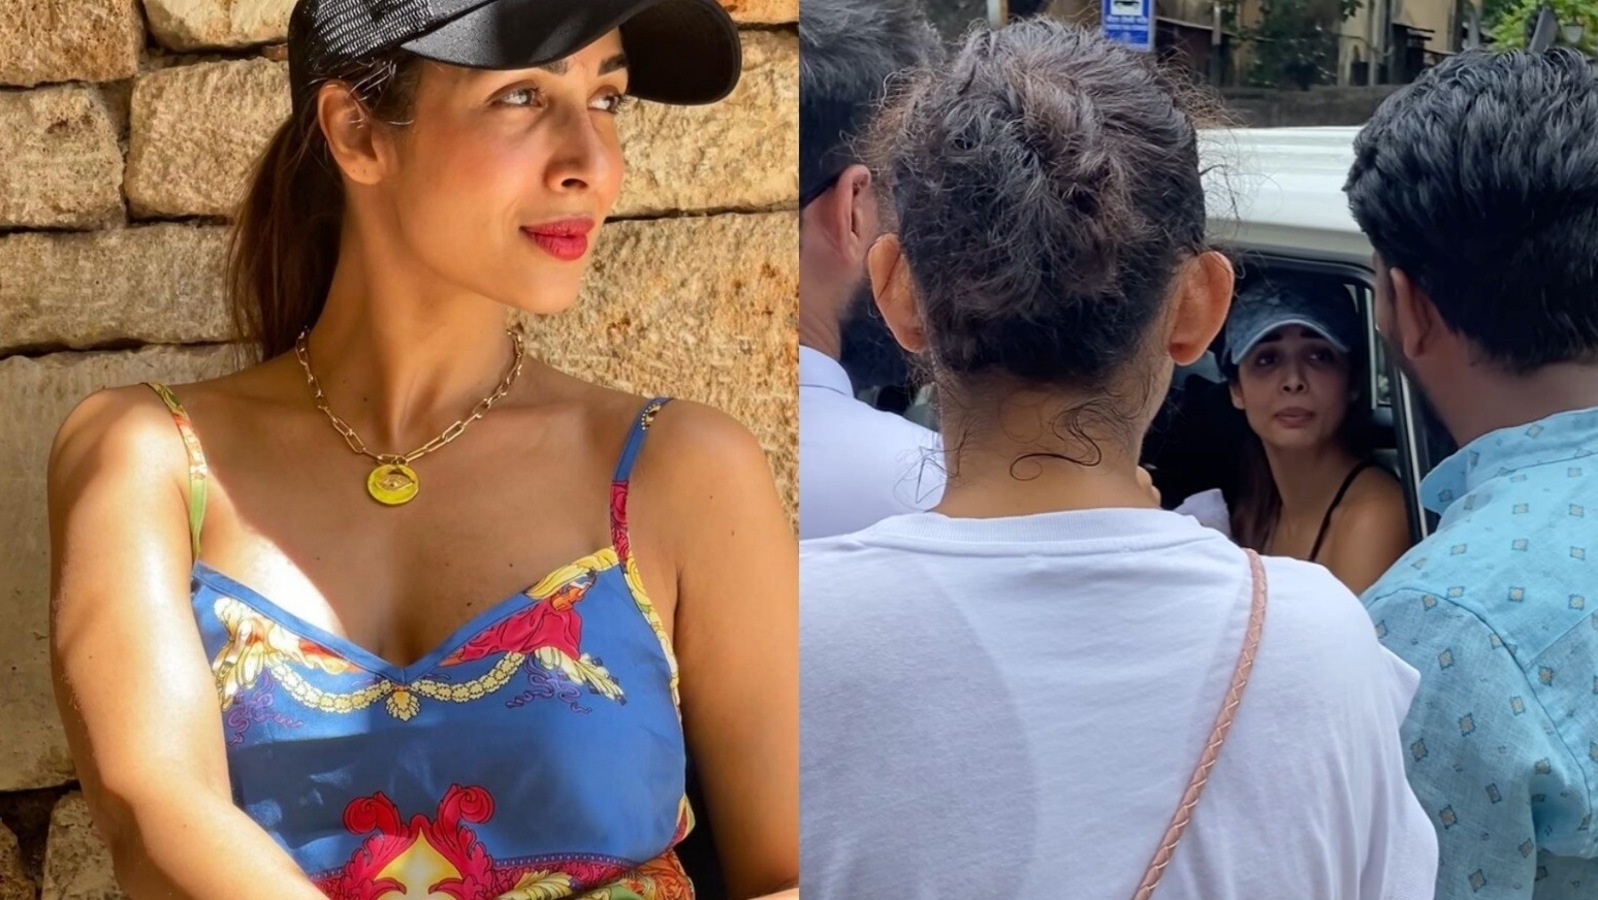 Malaika Arora says ‘kitna photo loge’ as fan tries to take selfies with her repeatedly. Watch video